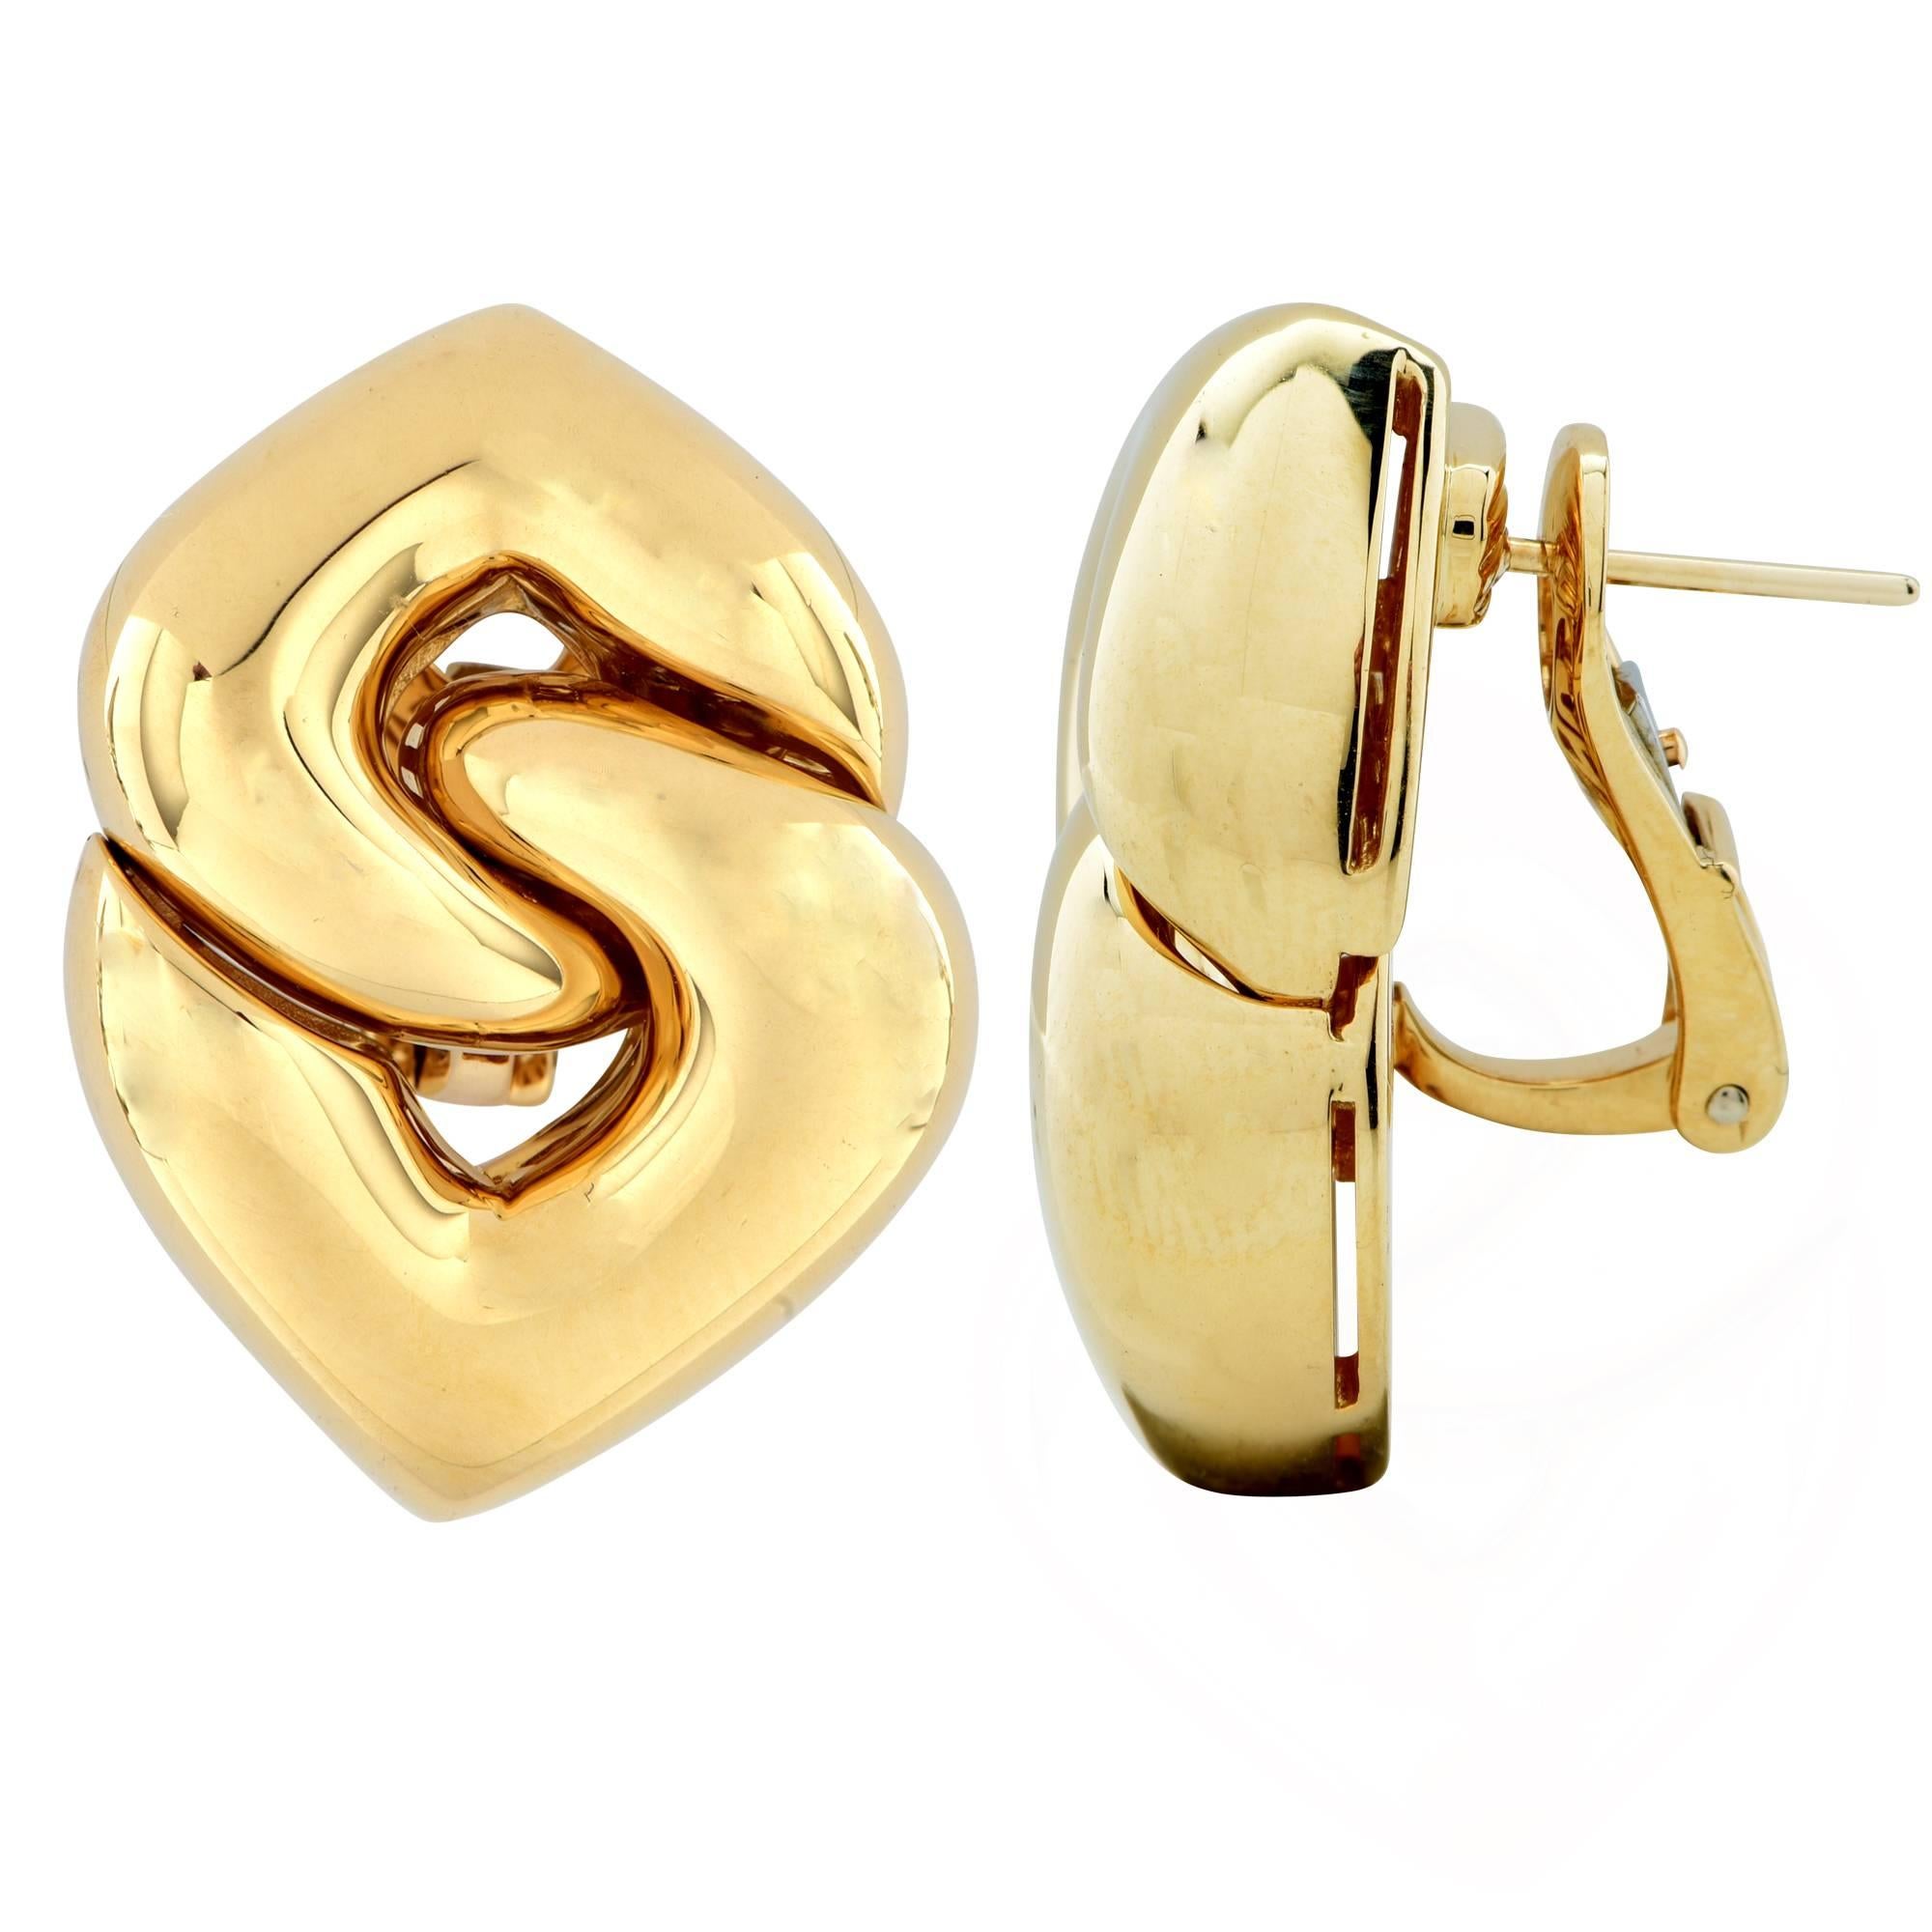 Beautiful 18k Yellow Gold Bvlgari Doppio earrings featuring a high polish interlocking heart design.

These fabulous earrings measure 1.20 inches by .90 inch.
It is stamped and/or tested as 18k gold.
The metal weight is 37.96 grams.

These Bvlgari